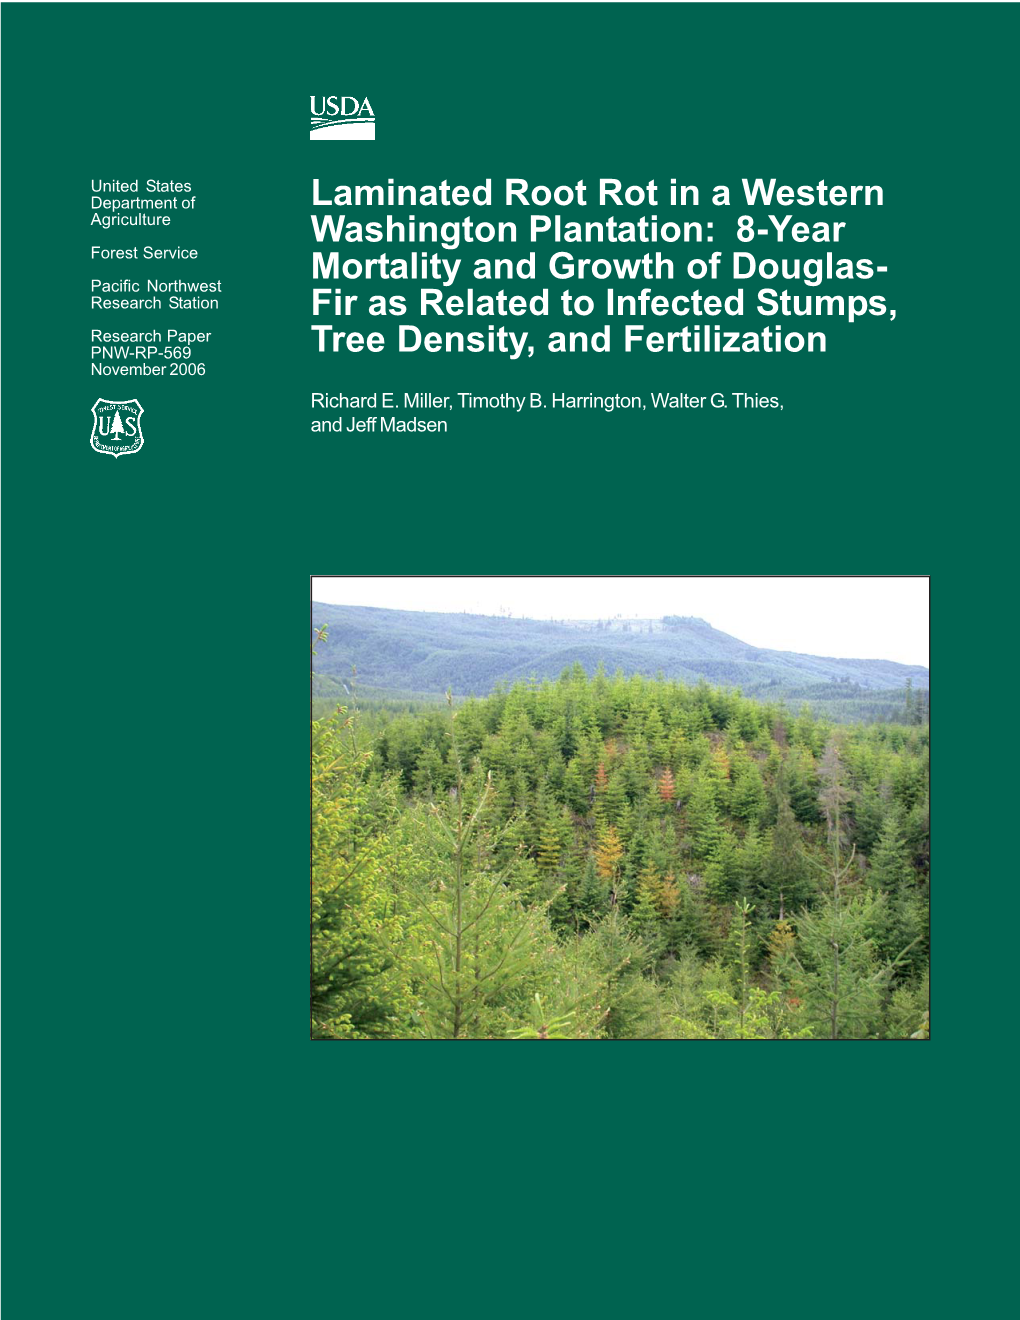 Laminated Root Rot in a Western Washington Plantation: 8-Year Mortality and Growth of Douglas-Fir As Related to Infected Stumps, Tree Density, and Fertilization